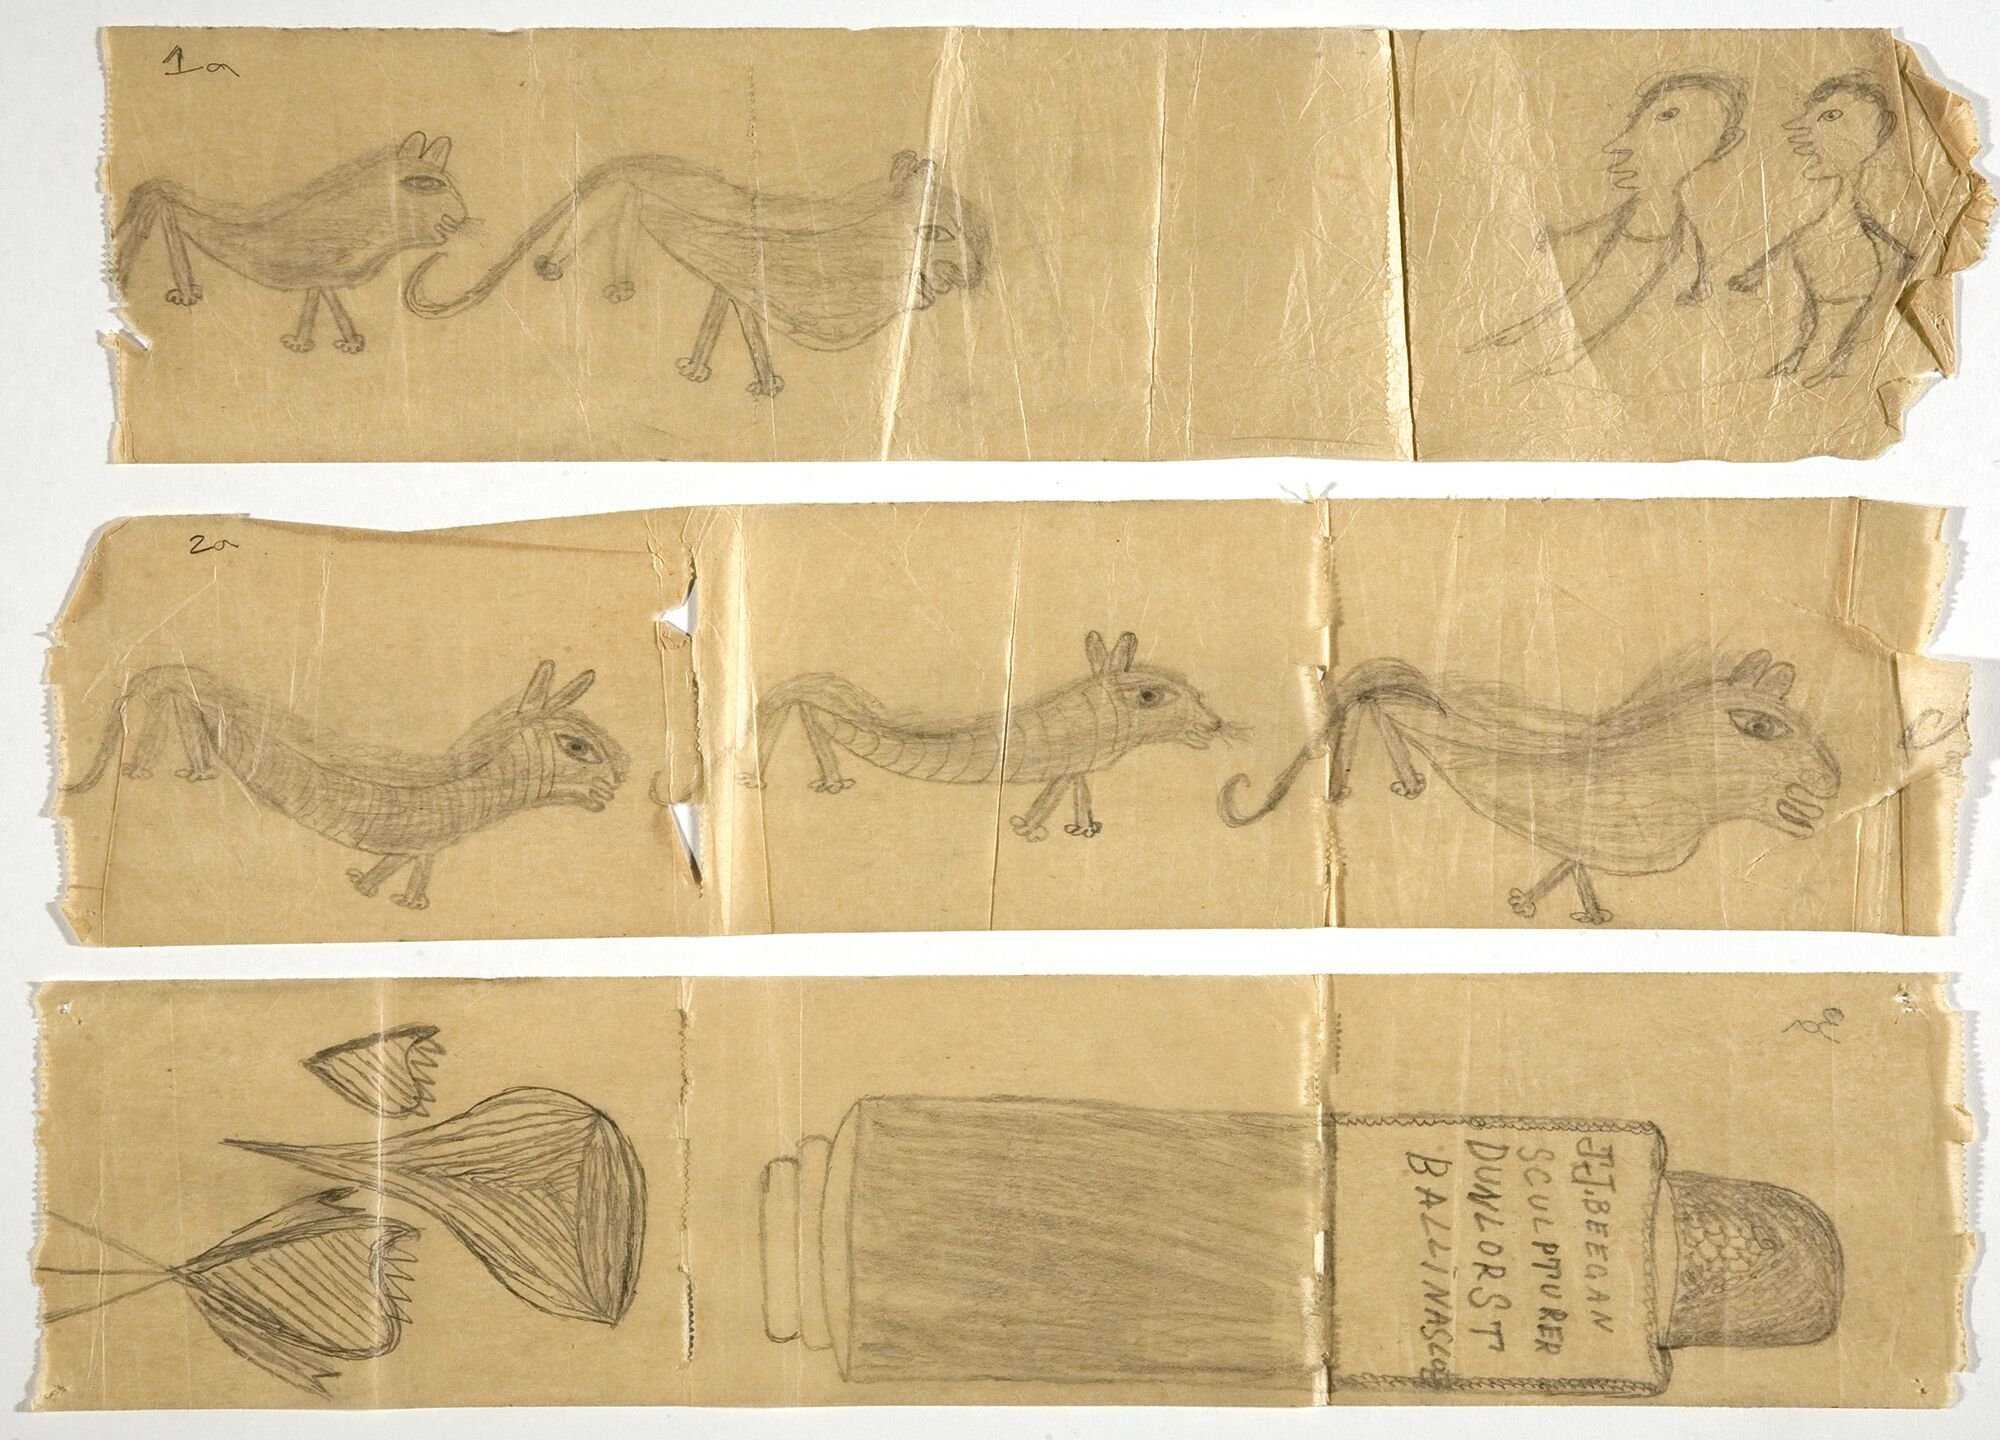 Graffiti on lavatory paper, J.J. Beegan. Courtesy of the Adamson Collection and the Wellcome Collection. Three numbered drawings by J.J. Beegan on three strips of tissue paper. The first drawing features lions facing humans facing each other. The second drawing features three lions all facing the same direction. The third drawing features three heart shaped flowers at the base of the scene, with a bottle floating on top. The bottle features text, reading “J.J. BEEGAN SCULPTERER DUNLOR ST BALLINASLOE.”